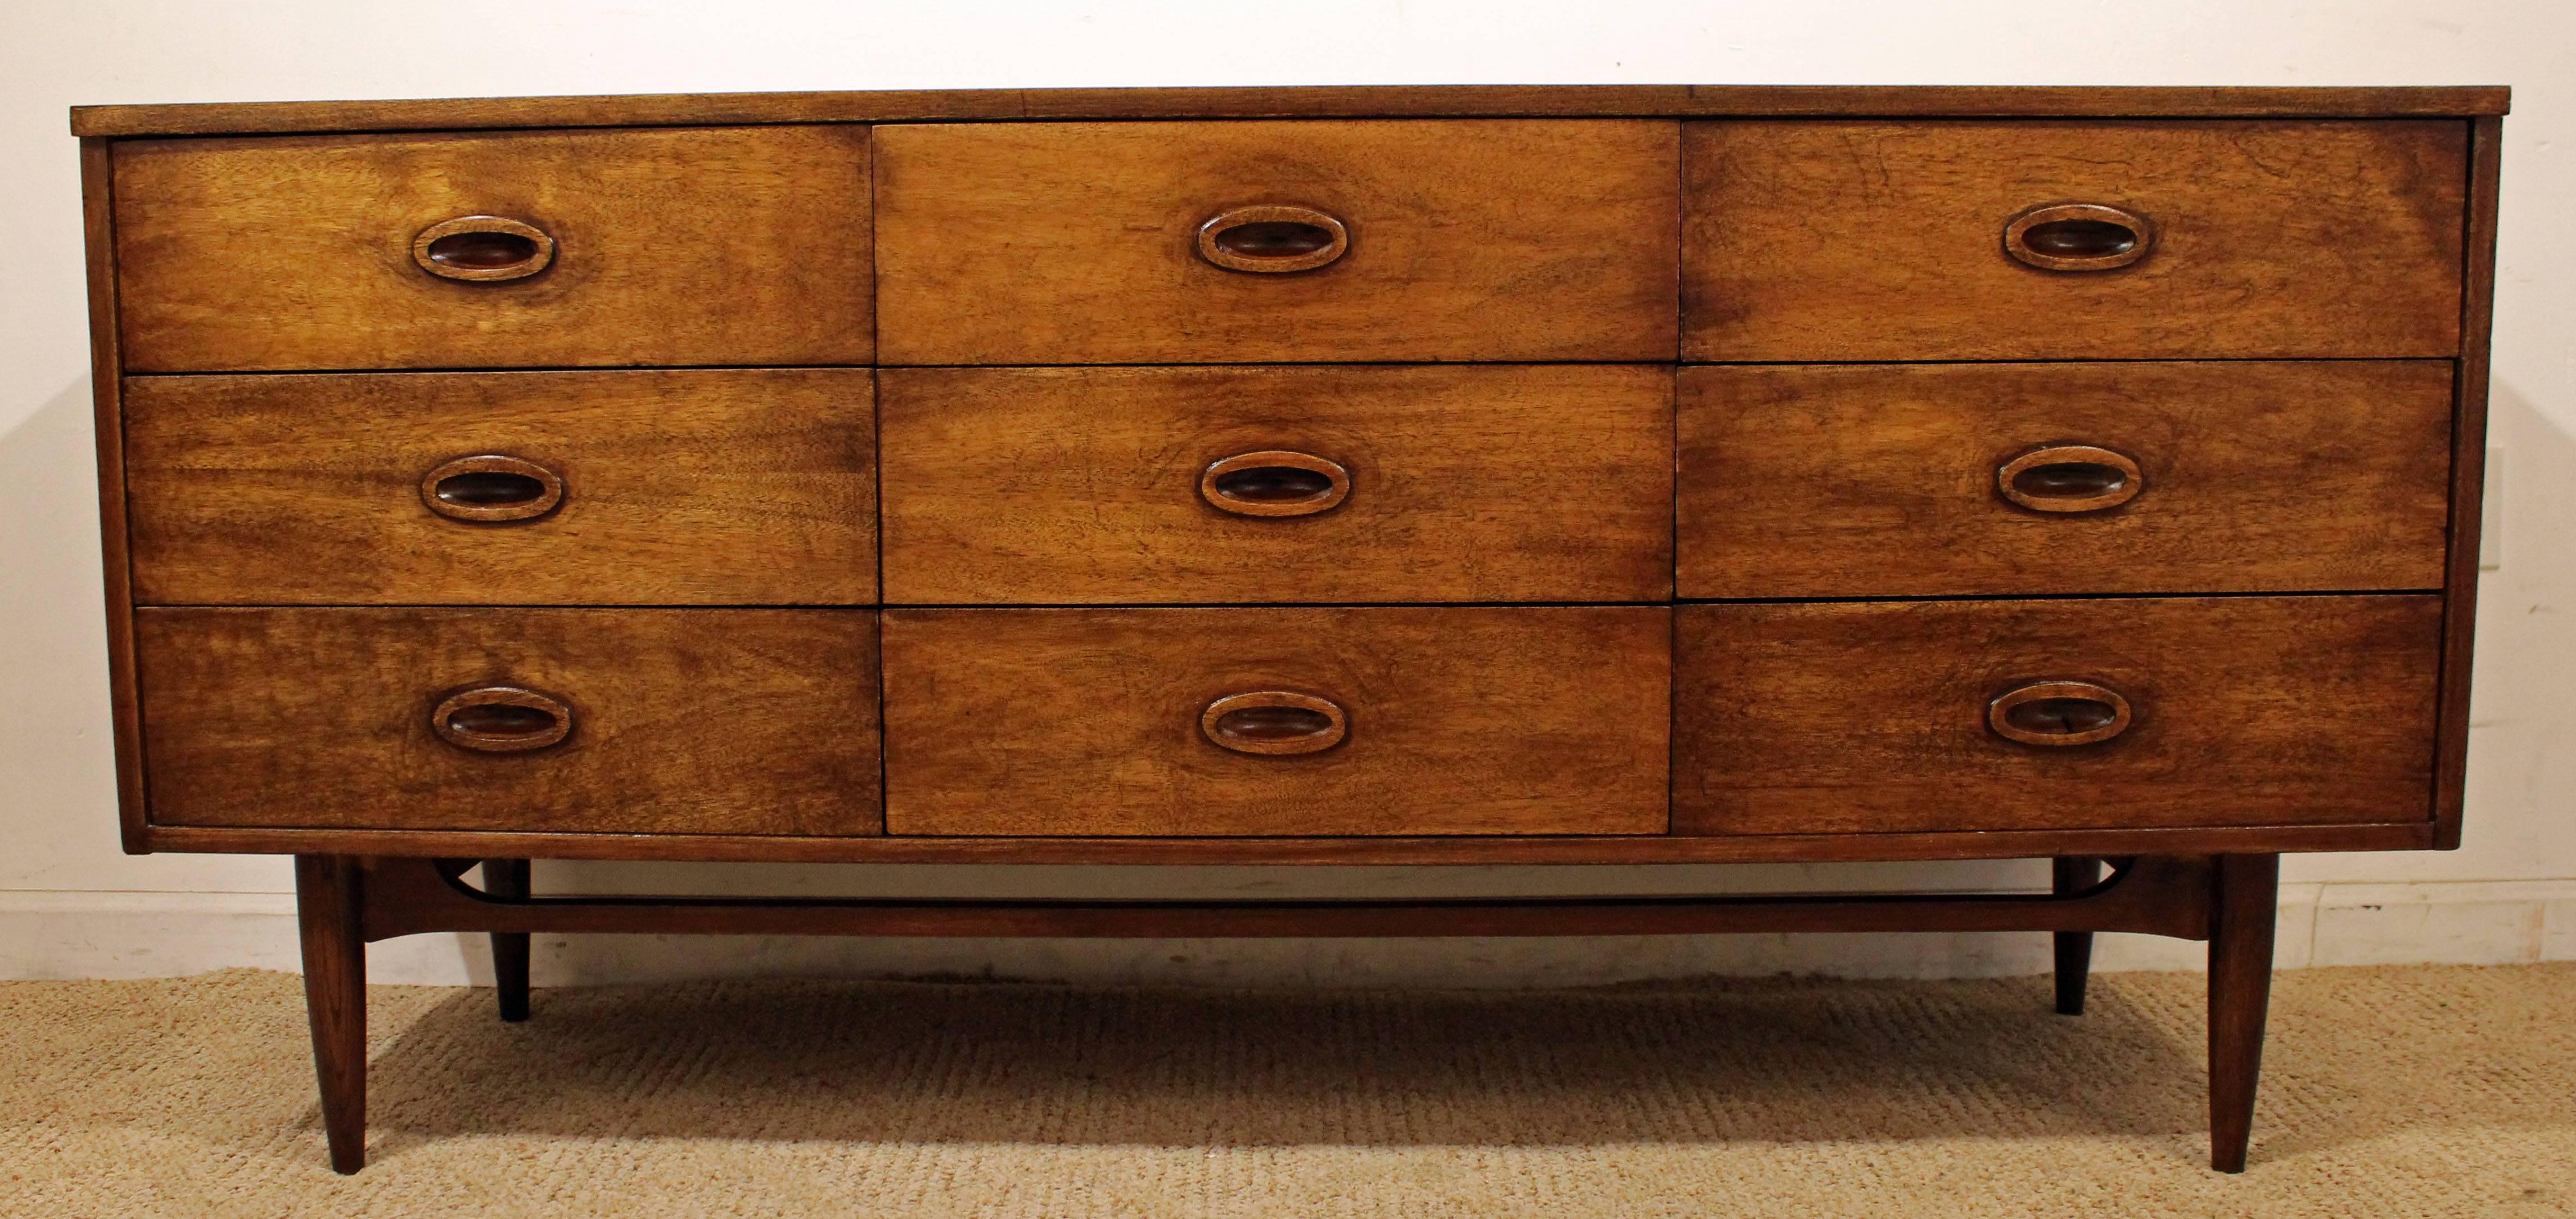 Offered is a Mid-Century Modern dresser. It is made of walnut, featuring  nine dovetailed drawers with recessed pulls. It is marked by Dixie. 

Dimension: 
64.25